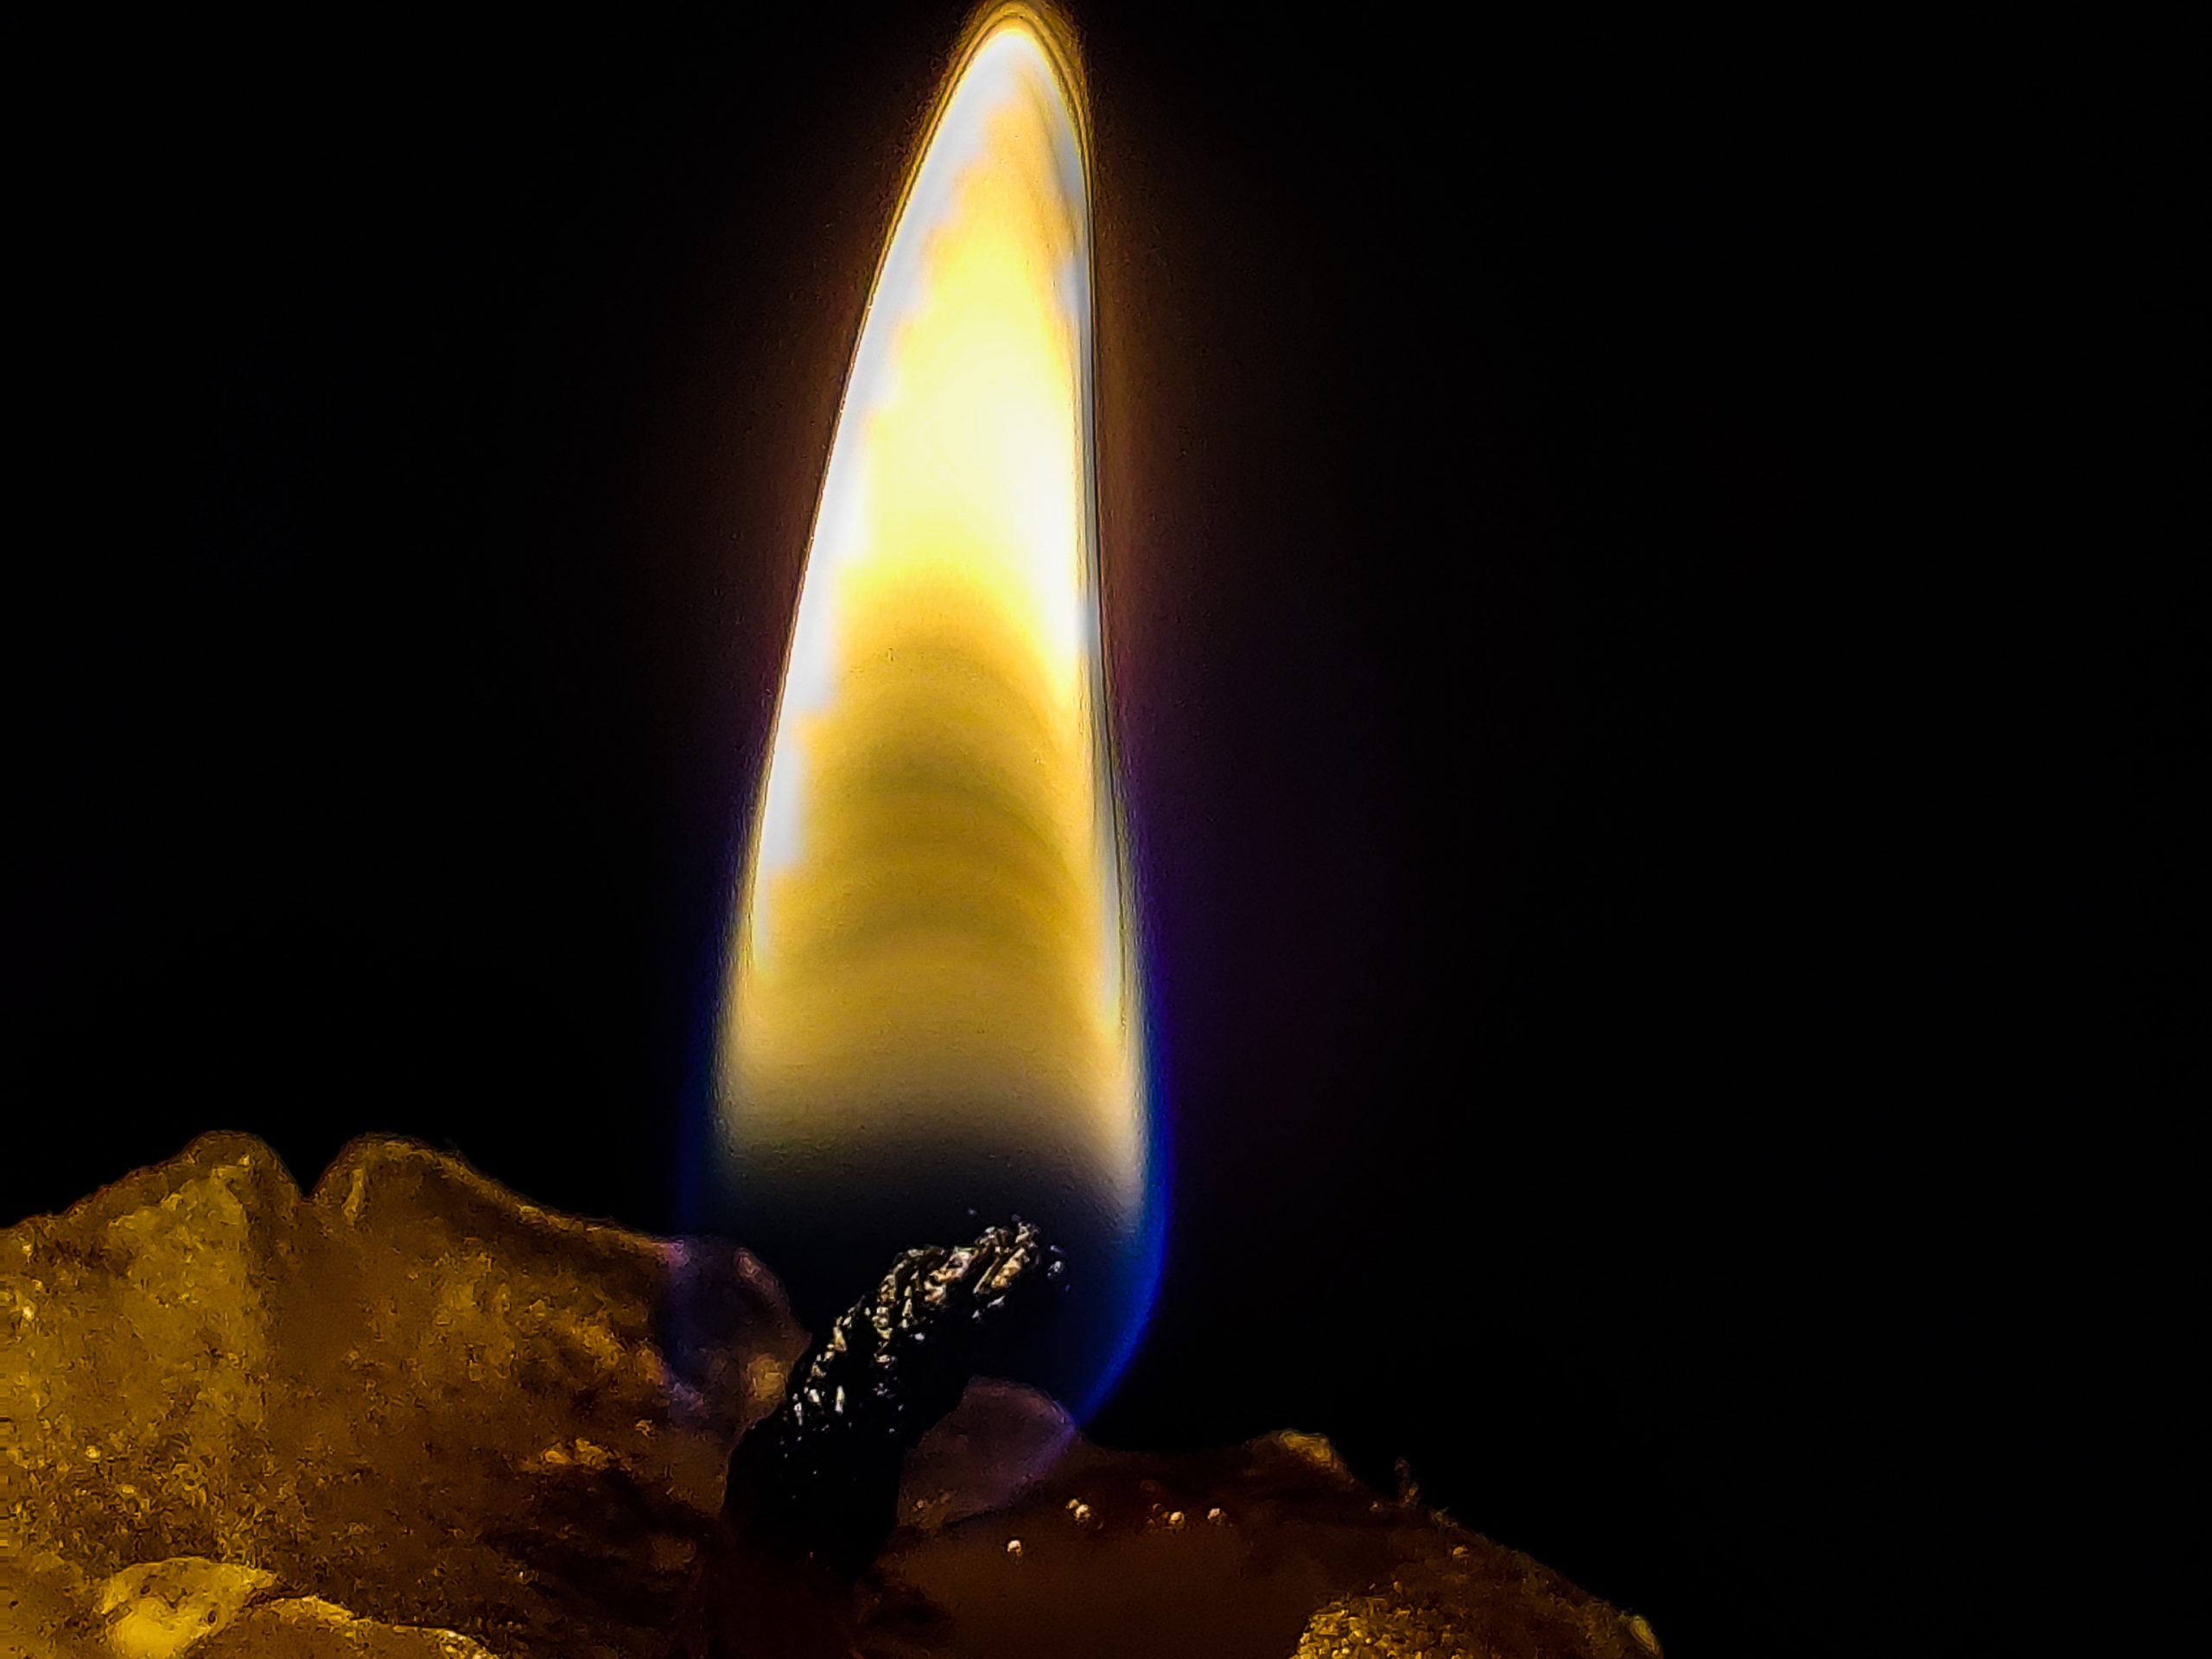 Flame of an oil lamp